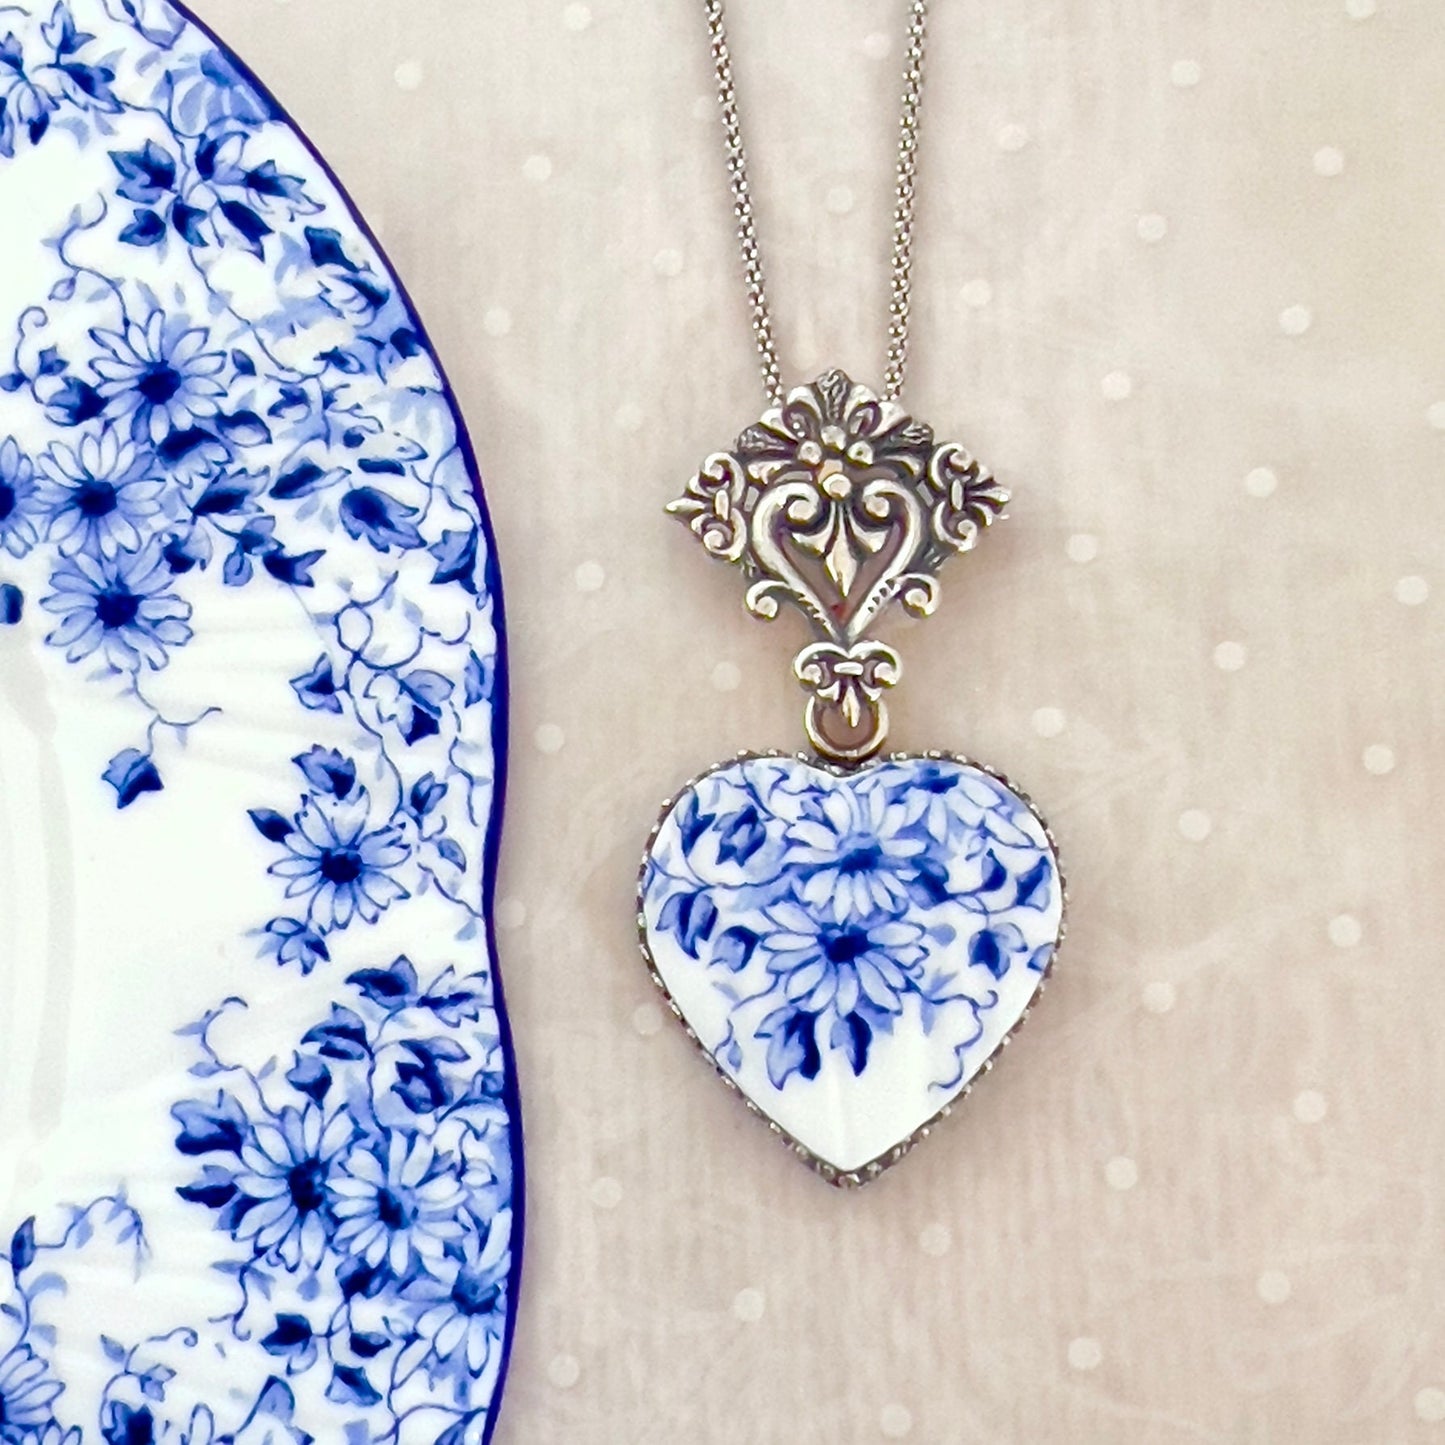 Romantic Heart Pendant Necklace or Brooch, Shelley Dainty Blue Broken China Jewelry